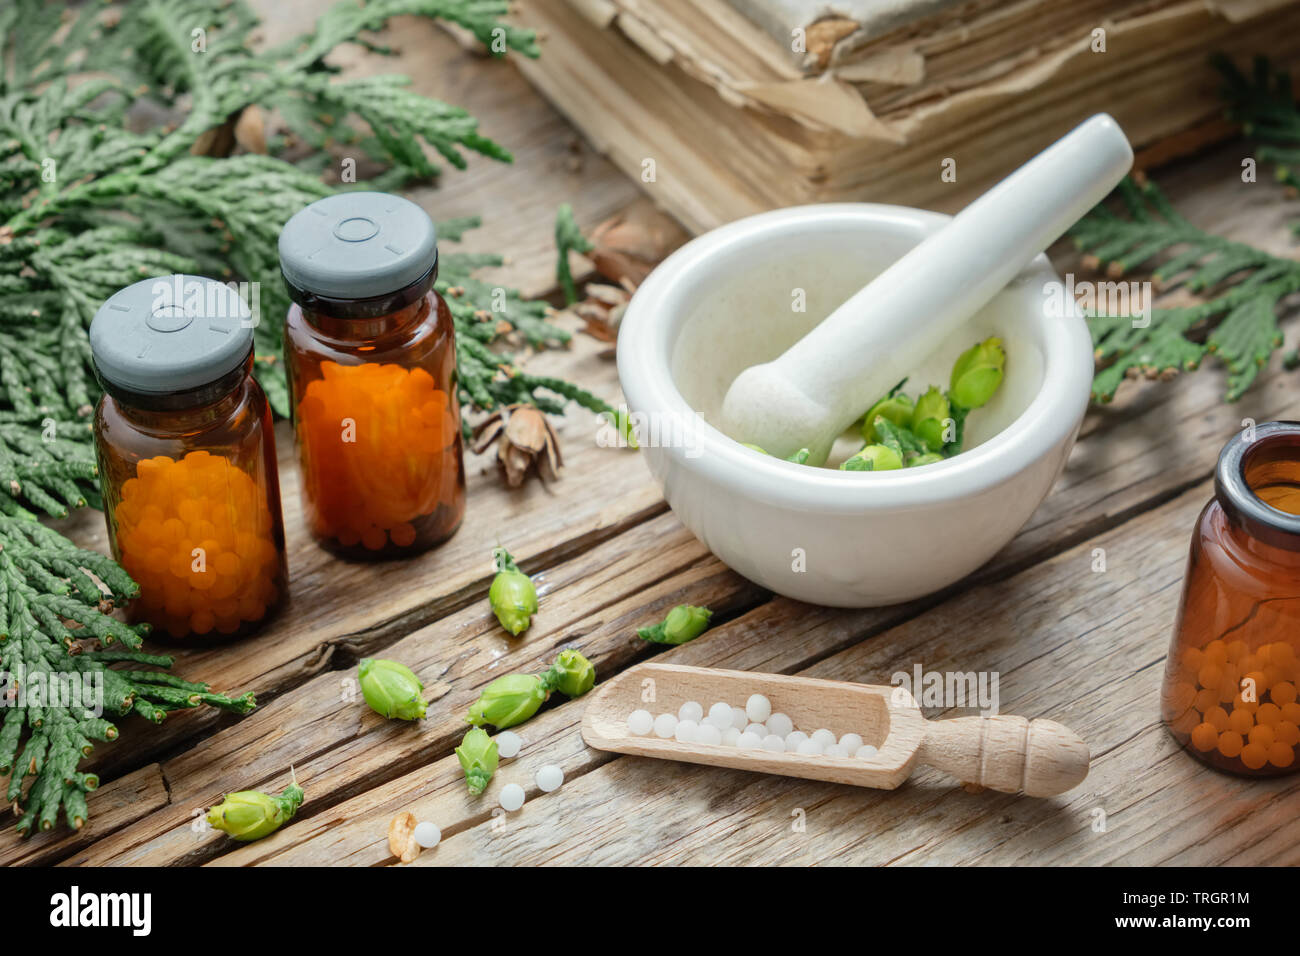 Bottles of homeopathic globules, Thuja occidentalis plant, old books and mortar. Homeopathy medicine. Stock Photo